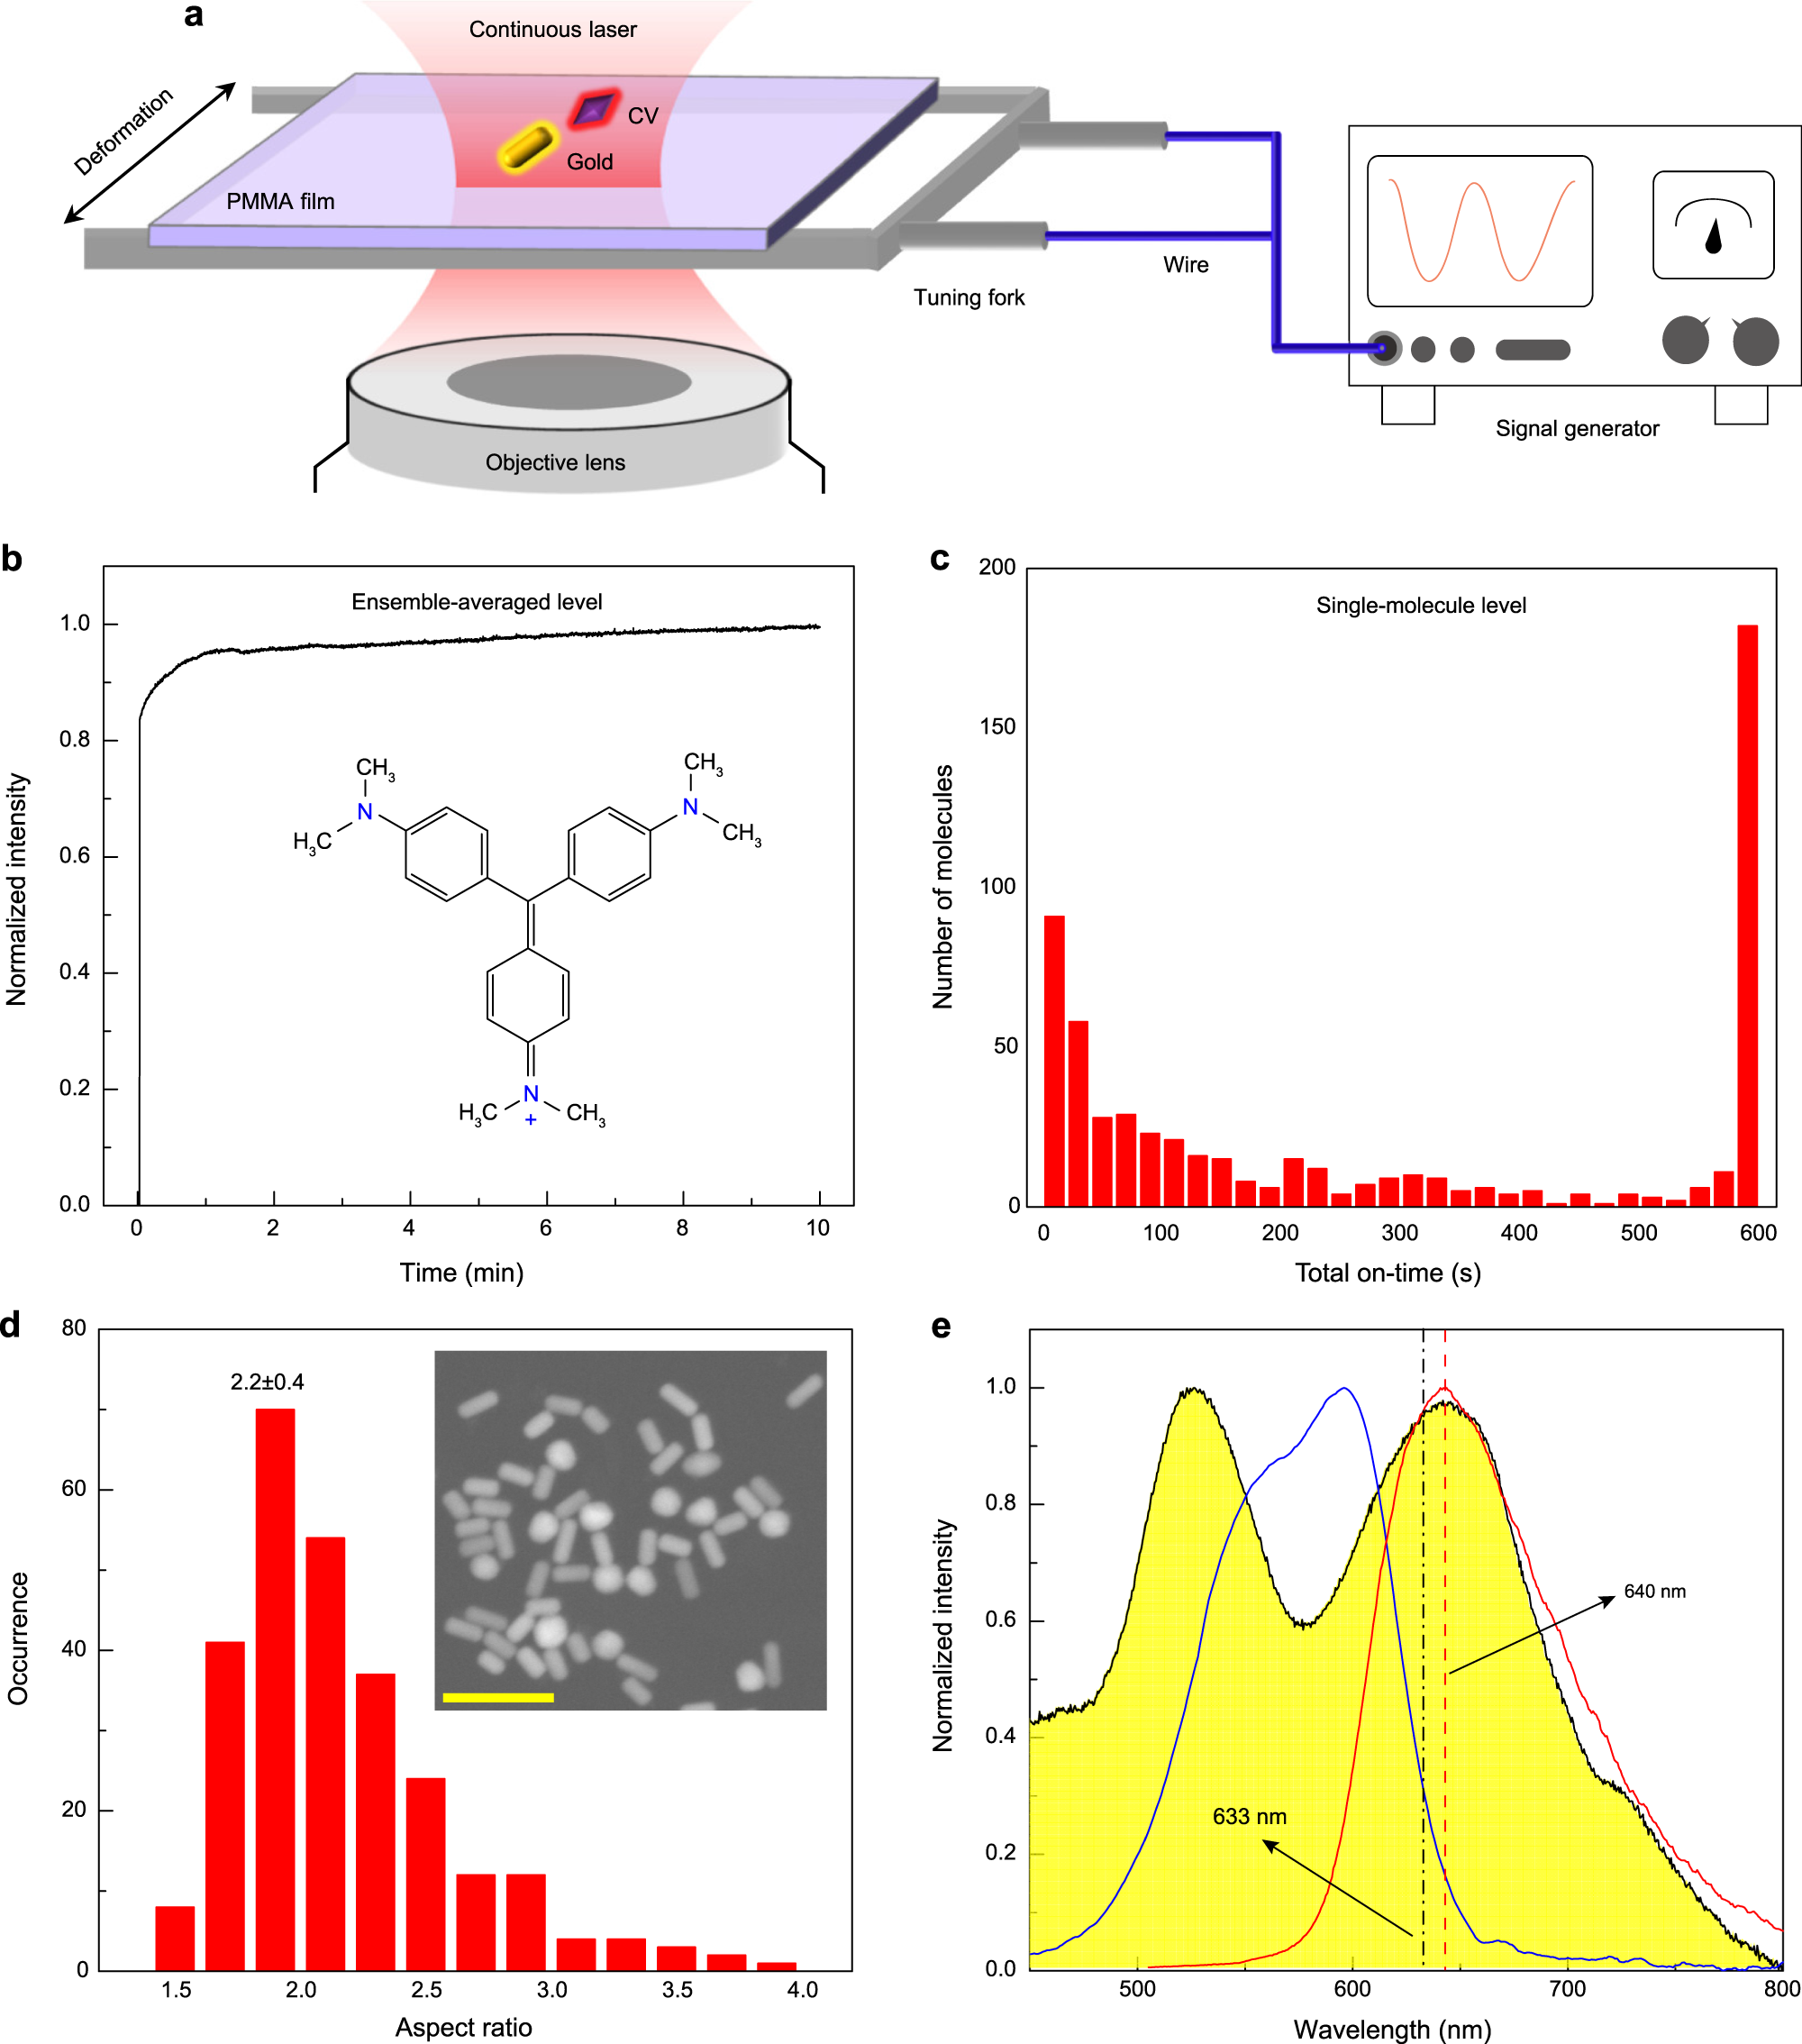 Ultrasensitive detection of local acoustic vibrations at room temperature  by plasmon-enhanced single-molecule fluorescence | Nature Communications